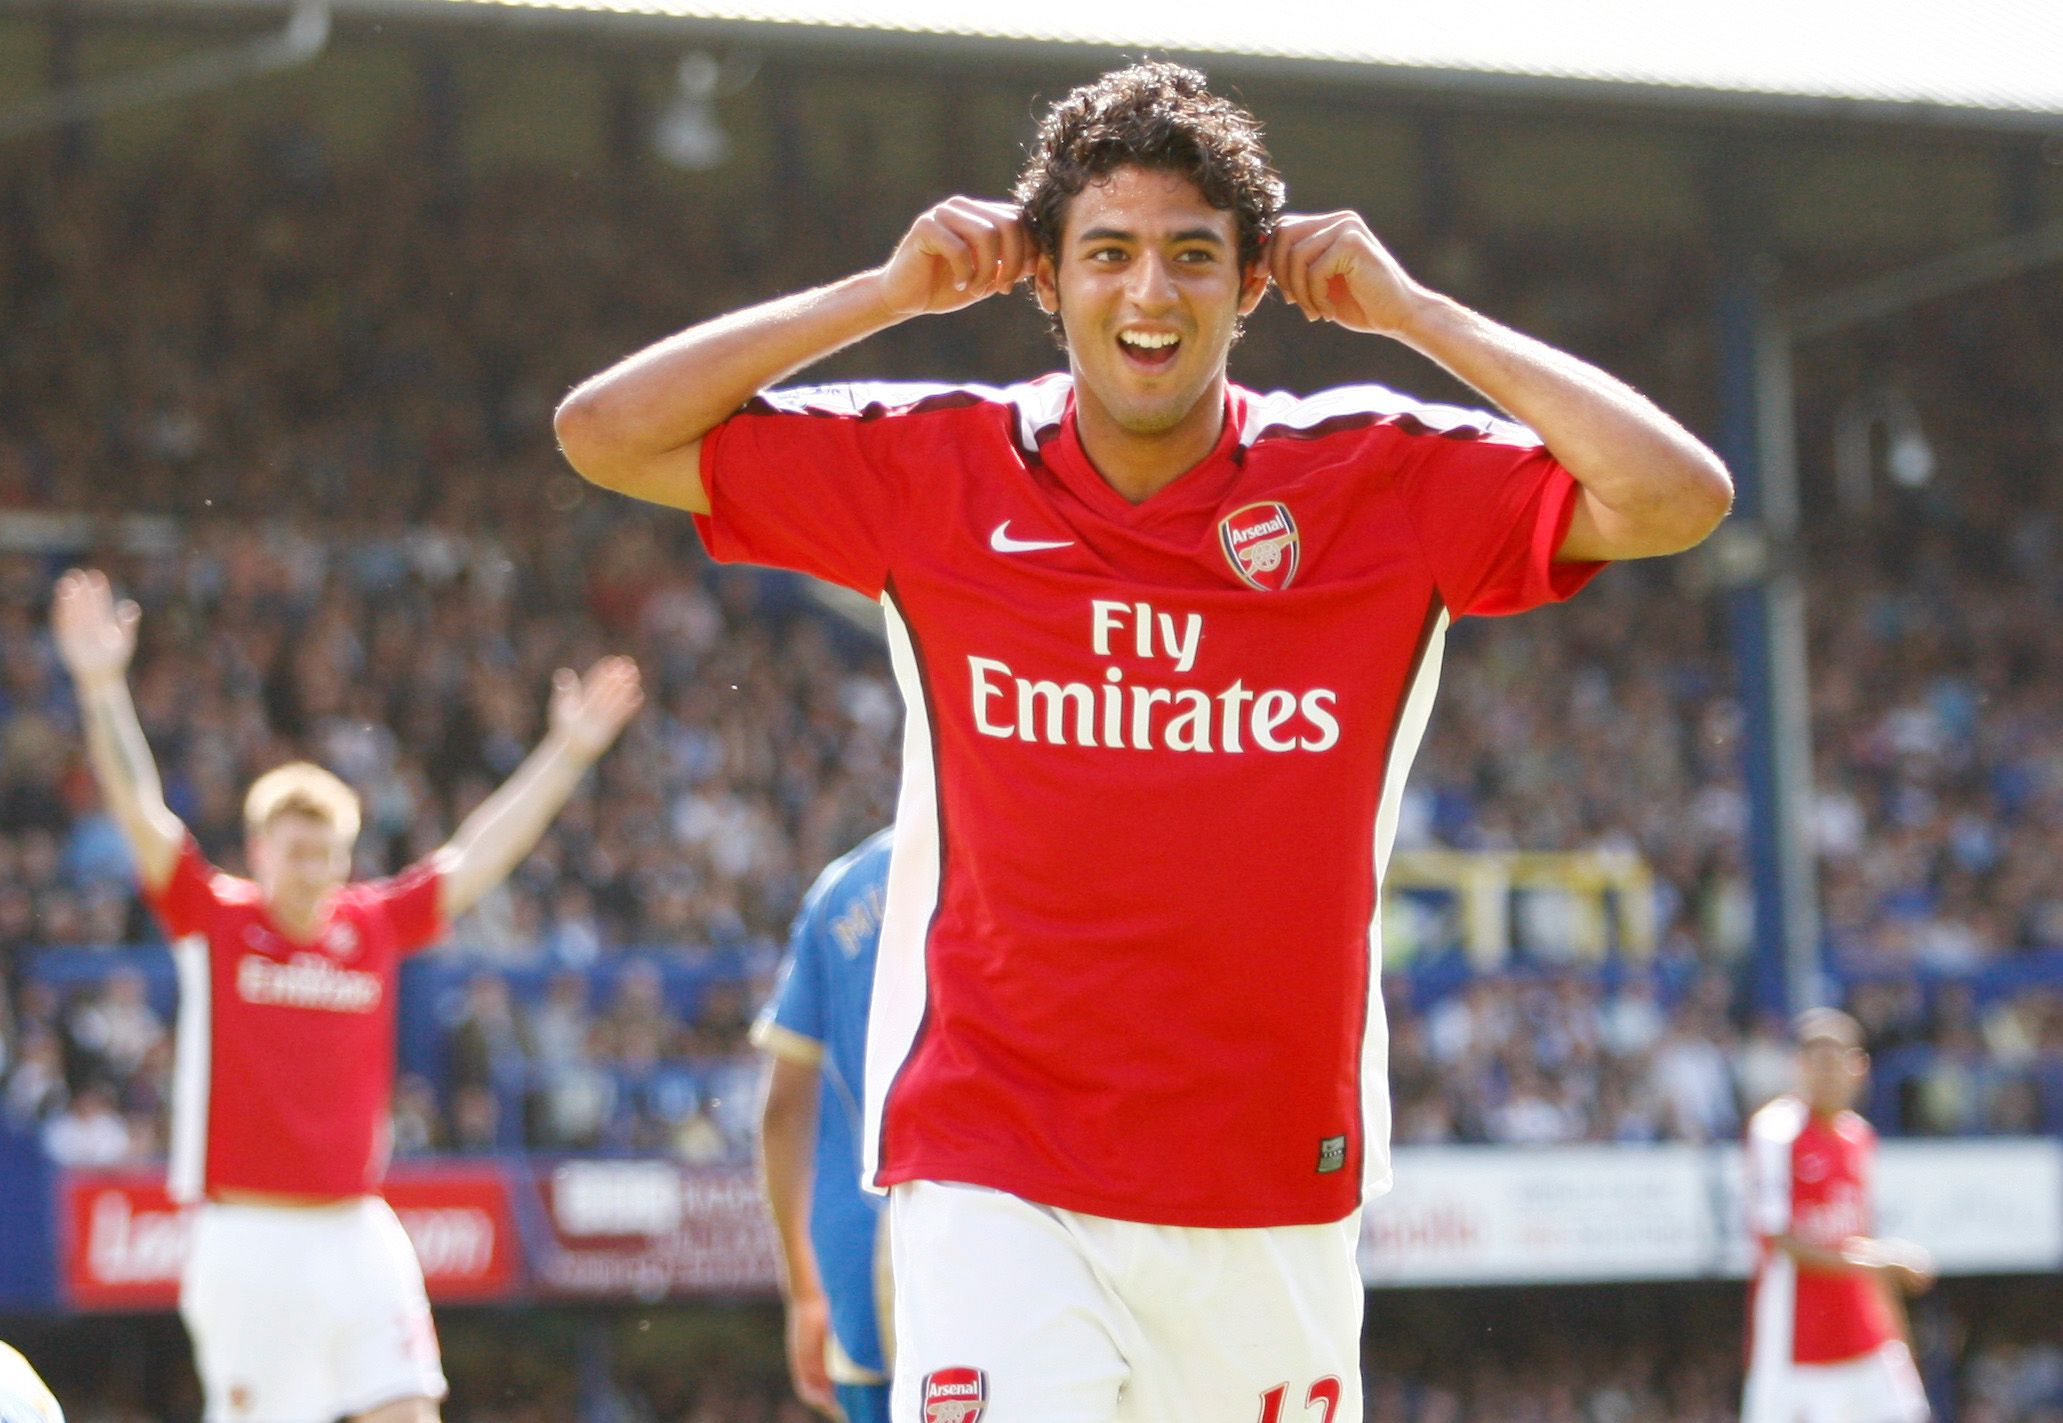 Football - Portsmouth v Arsenal Barclays Premier League  - Fratton Park - 2/5/09 
Carlos Vela celebrates after scoring the third goal for Arsenal 
Mandatory Credit: Action Images / Paul Harding 
Livepic 
NO ONLINE/INTERNET USE WITHOUT A LICENCE FROM THE FOOTBALL DATA CO LTD. FOR LICENCE ENQUIRIES PLEASE TELEPHONE +44 (0) 207 864 9000.